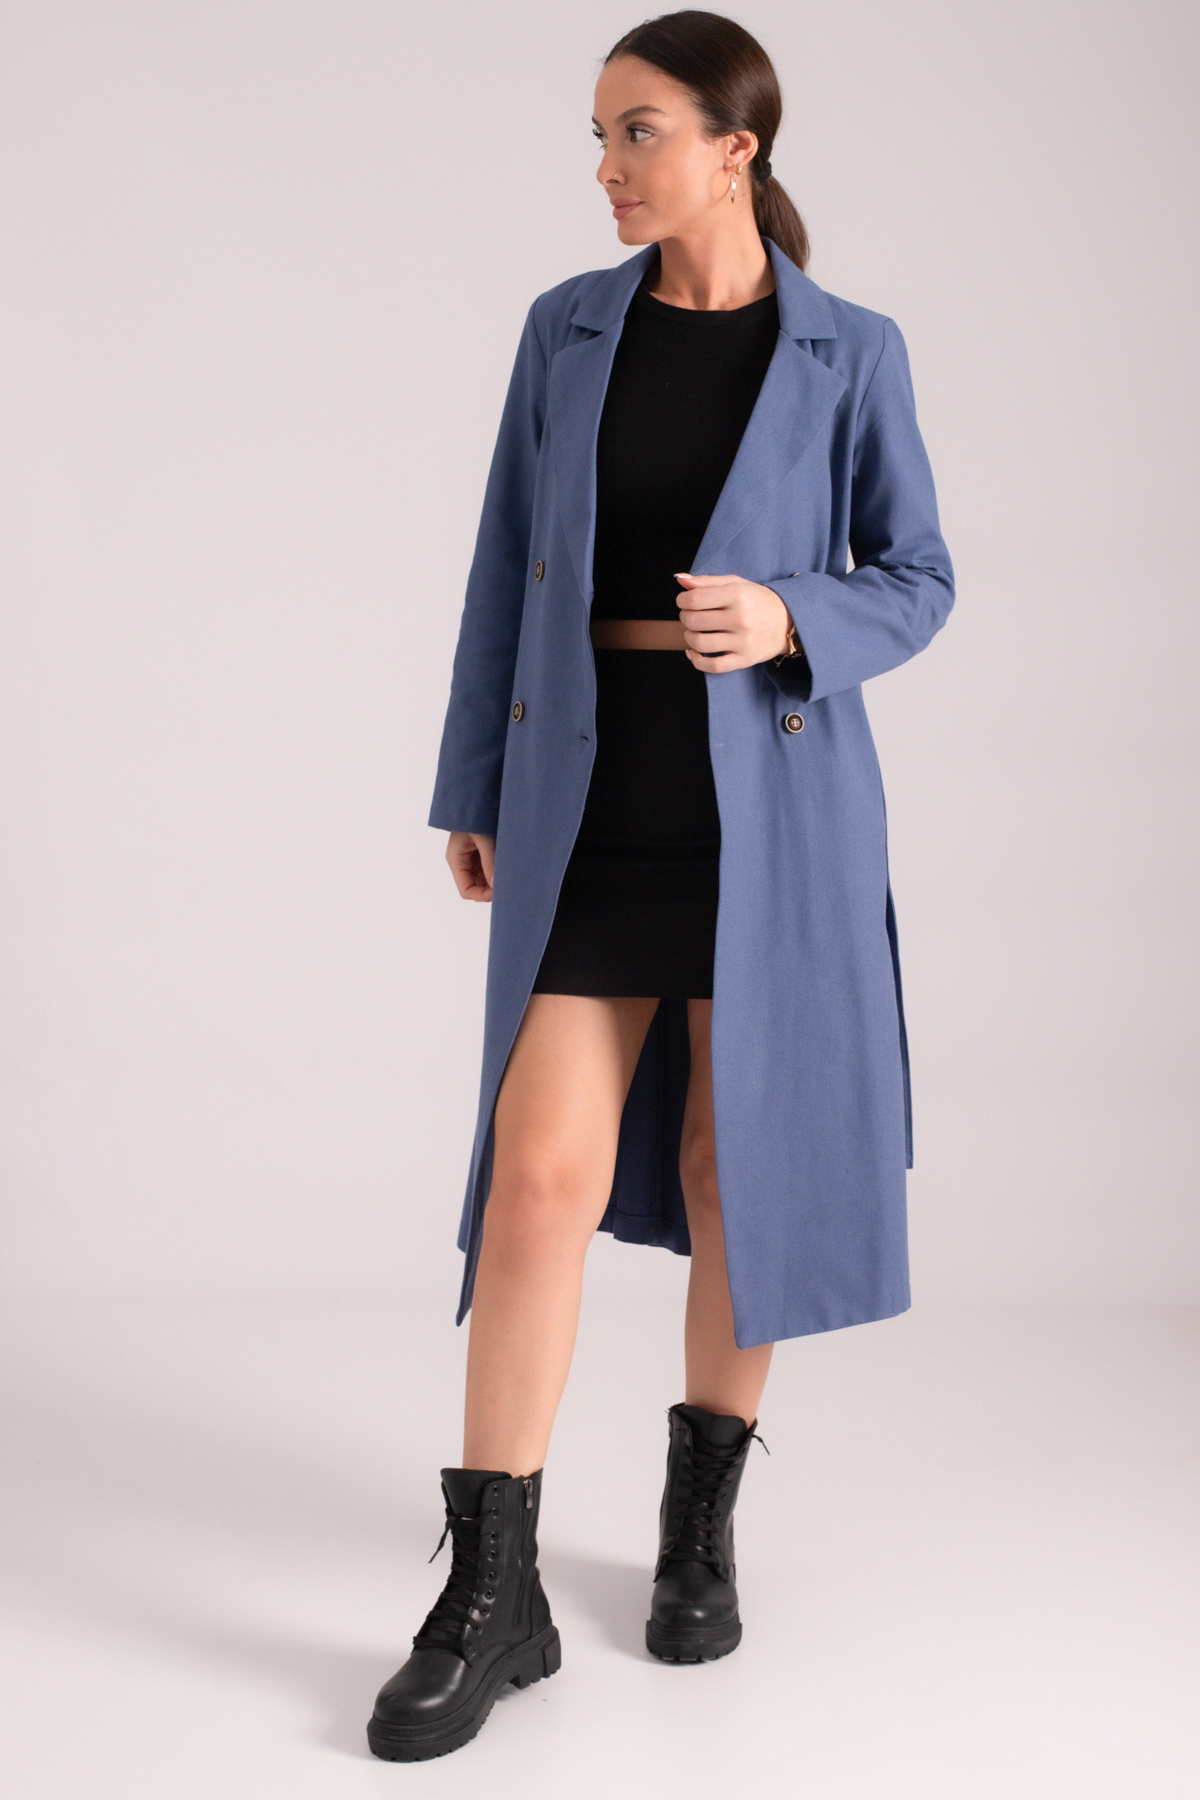 Levně armonika Women's Dark Blue Double Breasted Collar Waist Belted Long Trench Coat